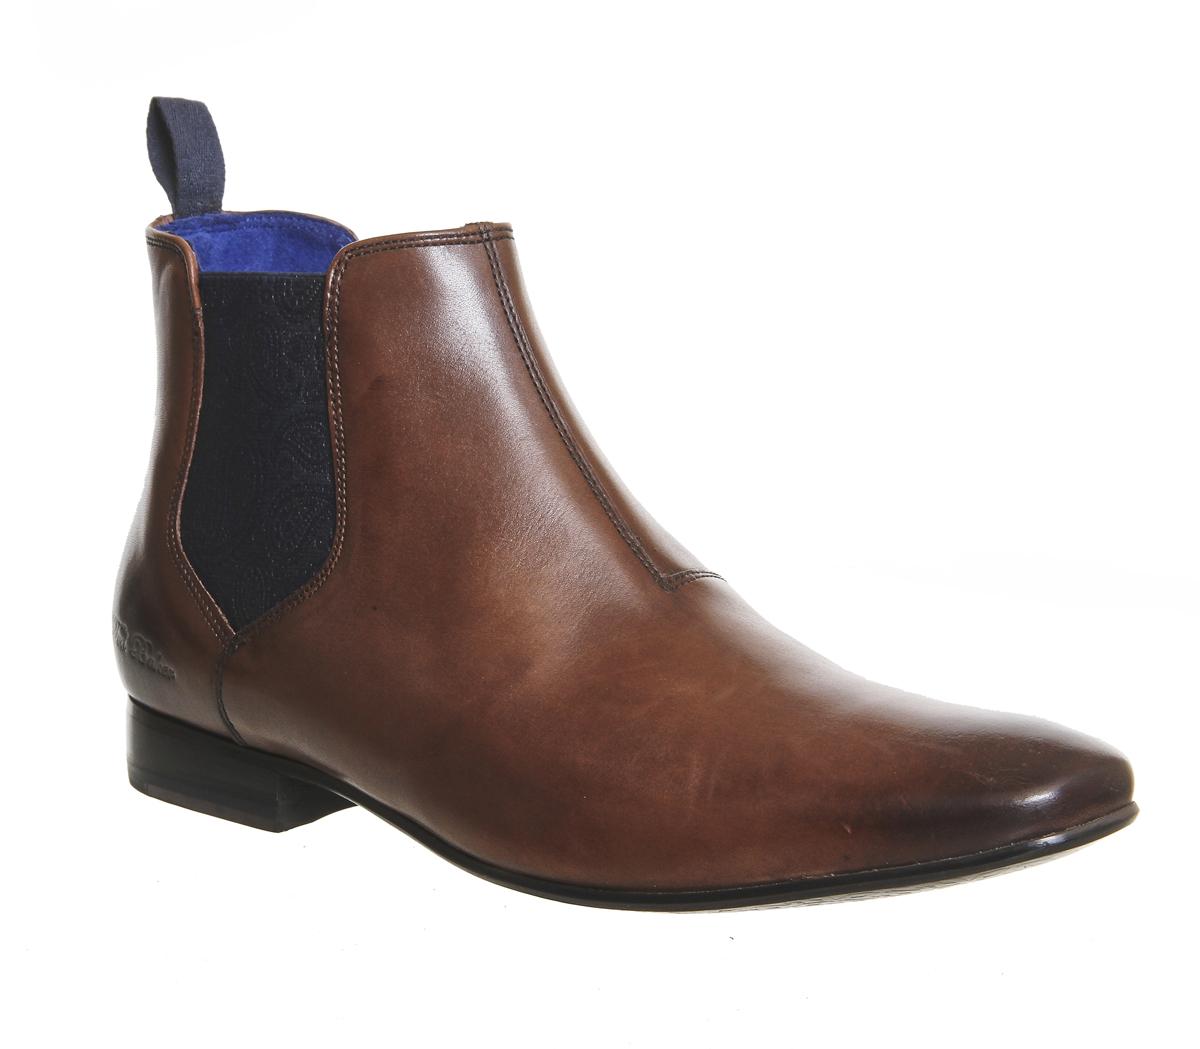 Ted BakerHourb 2 Chelsea BootsBrown Leather